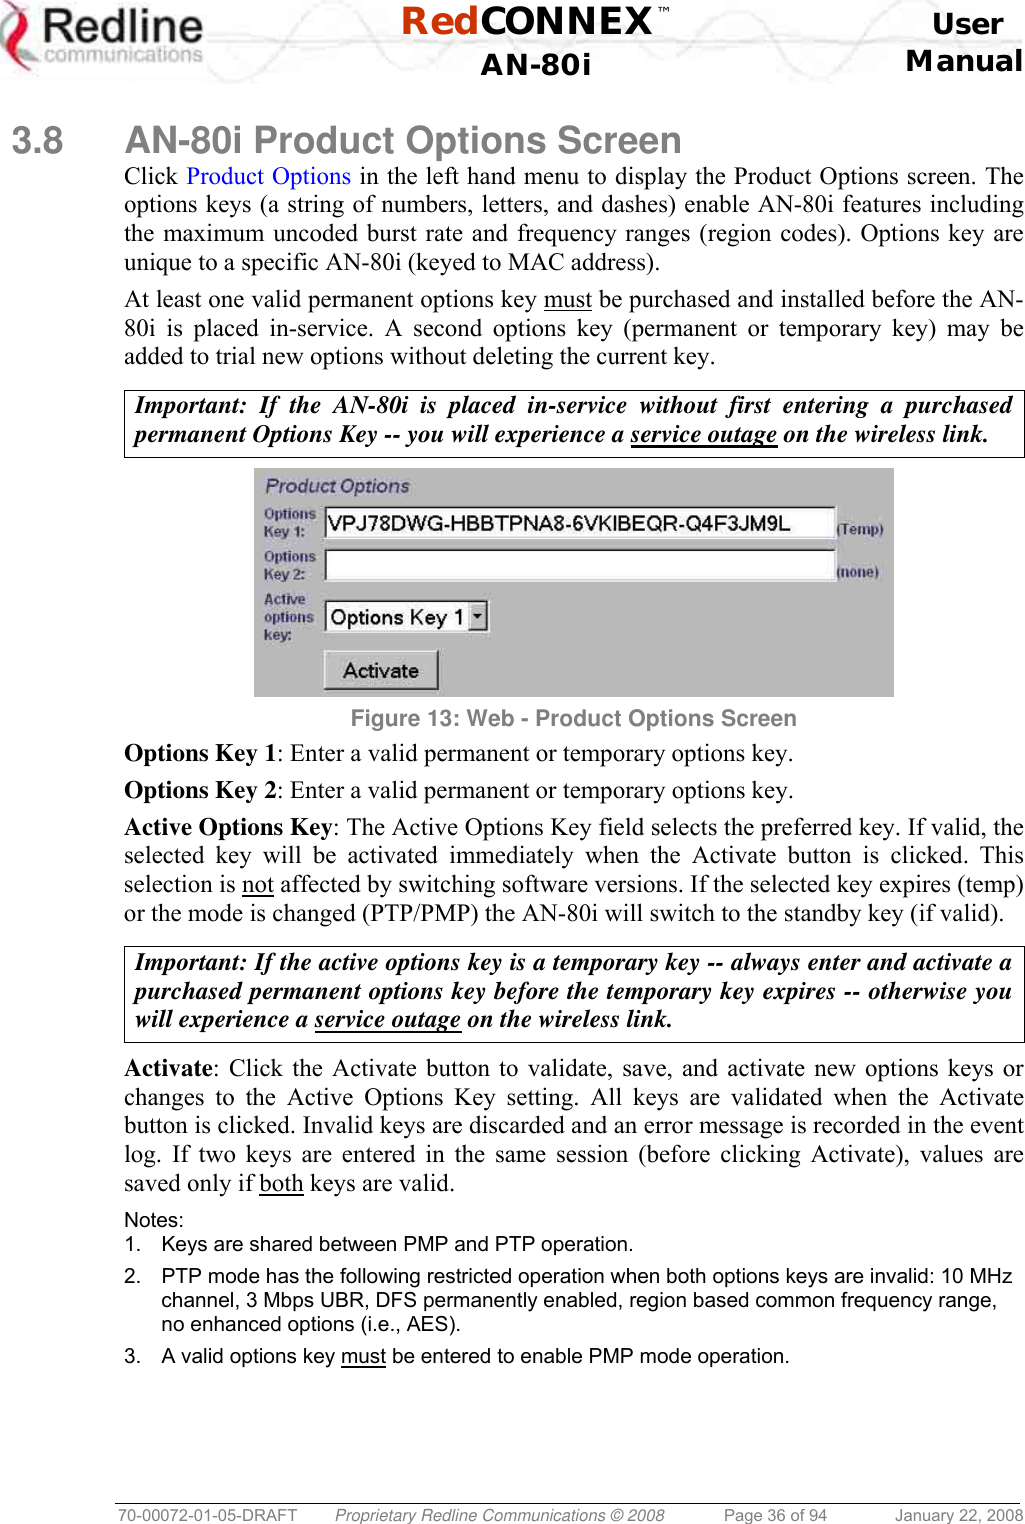  RedCONNEX™    User  AN-80i Manual  70-00072-01-05-DRAFT  Proprietary Redline Communications © 2008  Page 36 of 94  January 22, 2008  3.8  AN-80i Product Options Screen Click Product Options in the left hand menu to display the Product Options screen. The options keys (a string of numbers, letters, and dashes) enable AN-80i features including the maximum uncoded burst rate and frequency ranges (region codes). Options key are unique to a specific AN-80i (keyed to MAC address). At least one valid permanent options key must be purchased and installed before the AN-80i is placed in-service. A second options key (permanent or temporary key) may be added to trial new options without deleting the current key.  Important: If the AN-80i is placed in-service without first entering a purchased permanent Options Key -- you will experience a service outage on the wireless link.   Figure 13: Web - Product Options Screen Options Key 1: Enter a valid permanent or temporary options key.  Options Key 2: Enter a valid permanent or temporary options key. Active Options Key: The Active Options Key field selects the preferred key. If valid, the selected key will be activated immediately when the Activate button is clicked. This selection is not affected by switching software versions. If the selected key expires (temp) or the mode is changed (PTP/PMP) the AN-80i will switch to the standby key (if valid).  Important: If the active options key is a temporary key -- always enter and activate a purchased permanent options key before the temporary key expires -- otherwise you will experience a service outage on the wireless link.  Activate: Click the Activate button to validate, save, and activate new options keys or changes to the Active Options Key setting. All keys are validated when the Activate button is clicked. Invalid keys are discarded and an error message is recorded in the event log. If two keys are entered in the same session (before clicking Activate), values are saved only if both keys are valid.  Notes: 1.  Keys are shared between PMP and PTP operation. 2.  PTP mode has the following restricted operation when both options keys are invalid: 10 MHz channel, 3 Mbps UBR, DFS permanently enabled, region based common frequency range, no enhanced options (i.e., AES). 3.  A valid options key must be entered to enable PMP mode operation. 